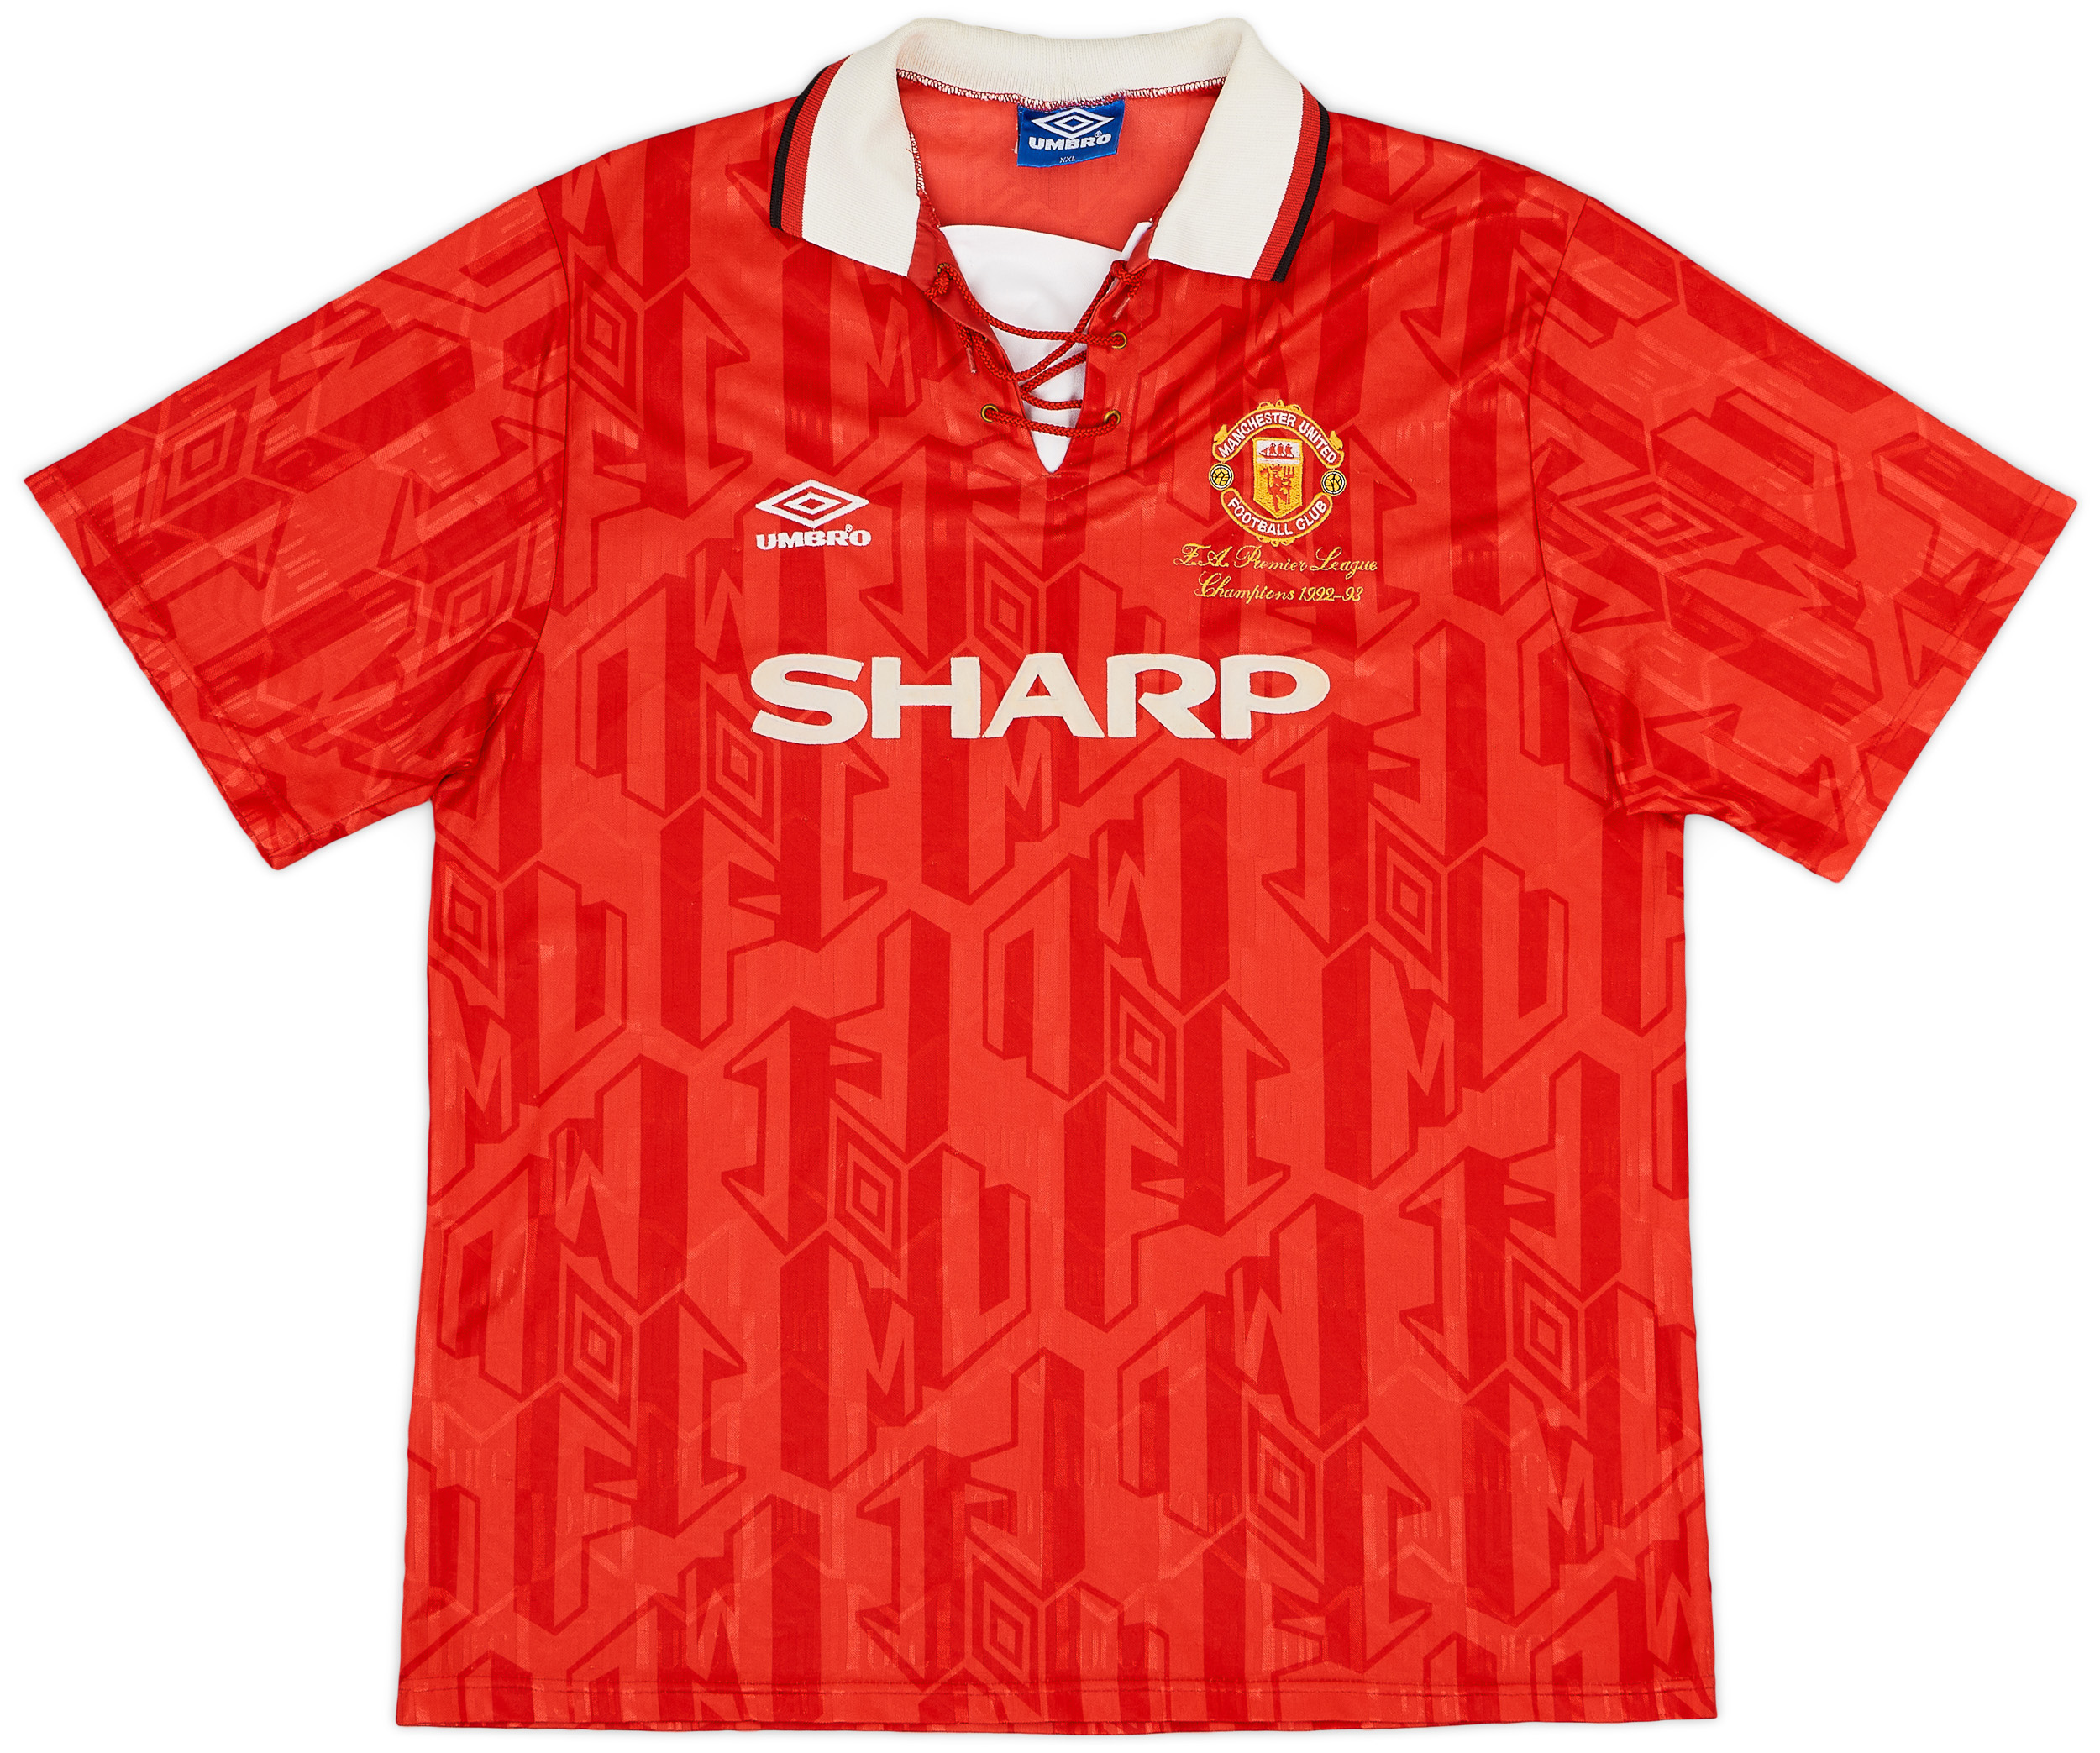 1992-94 Manchester United 'Champions' Home Shirt - 8/10 - ()